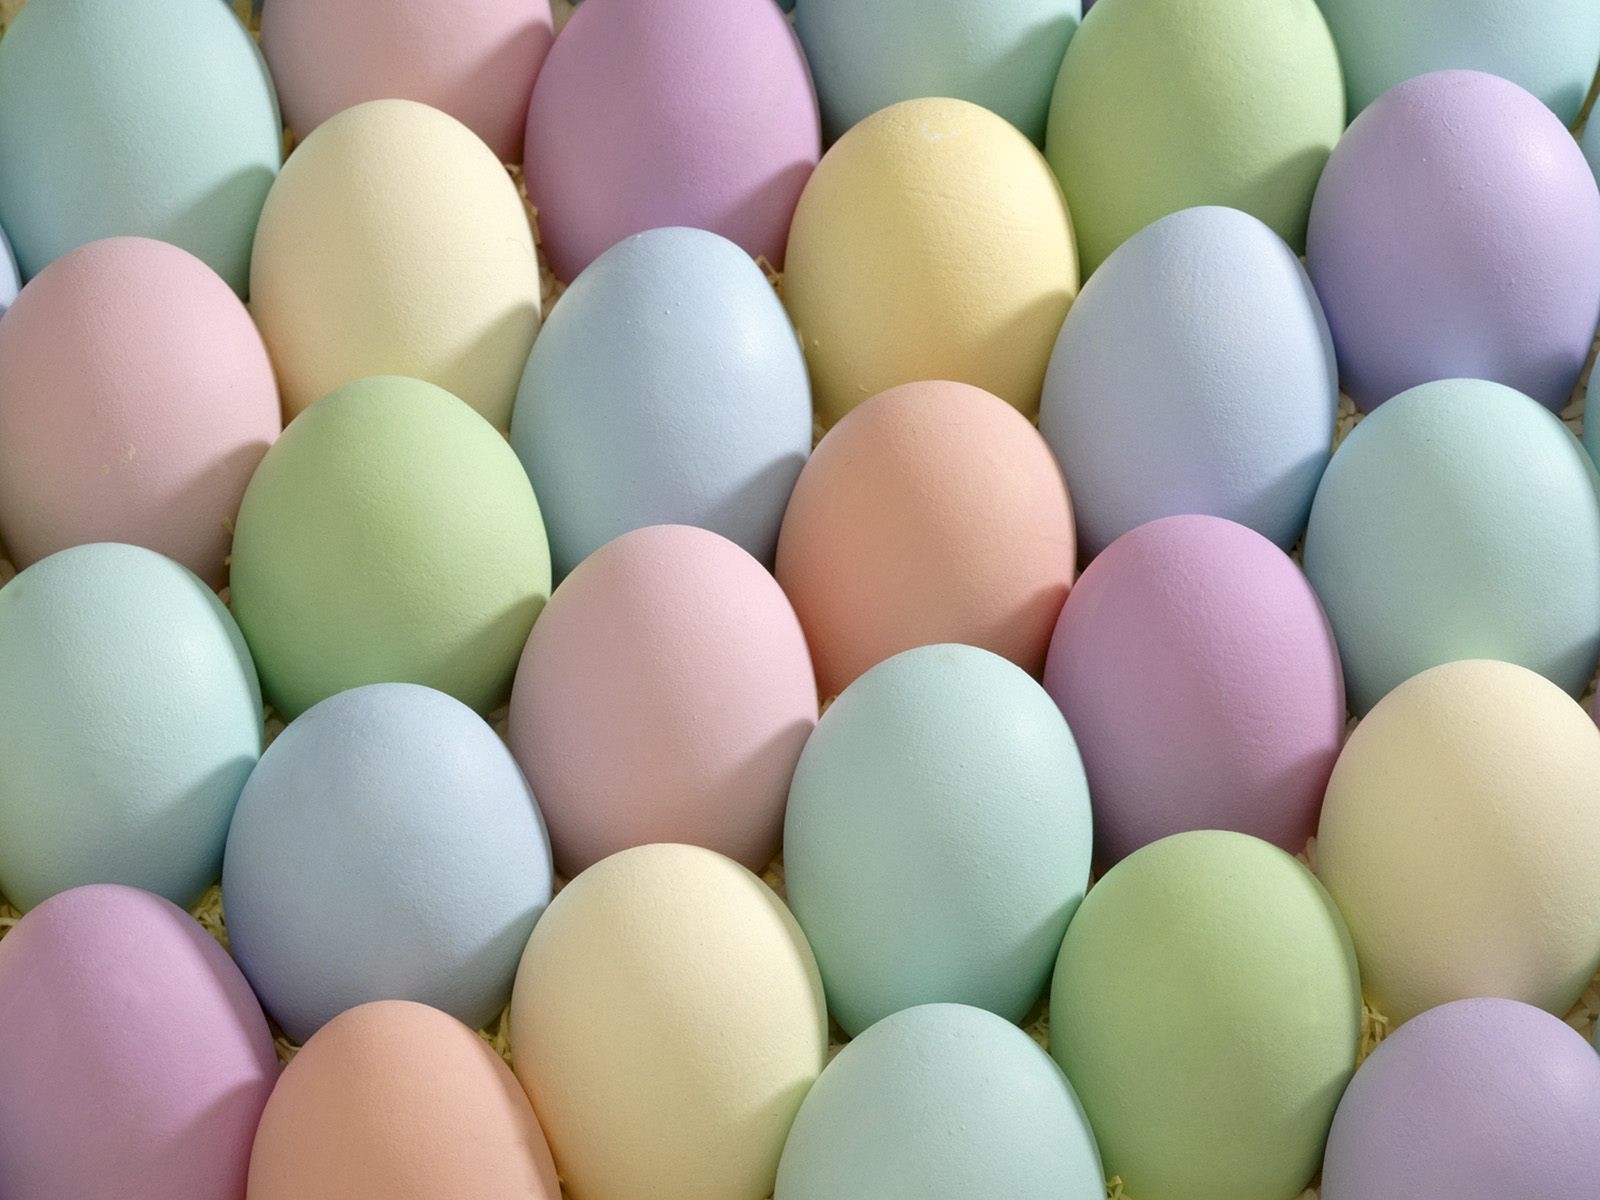 Easter eggs are pastel colored and are placed in a carton. - Egg